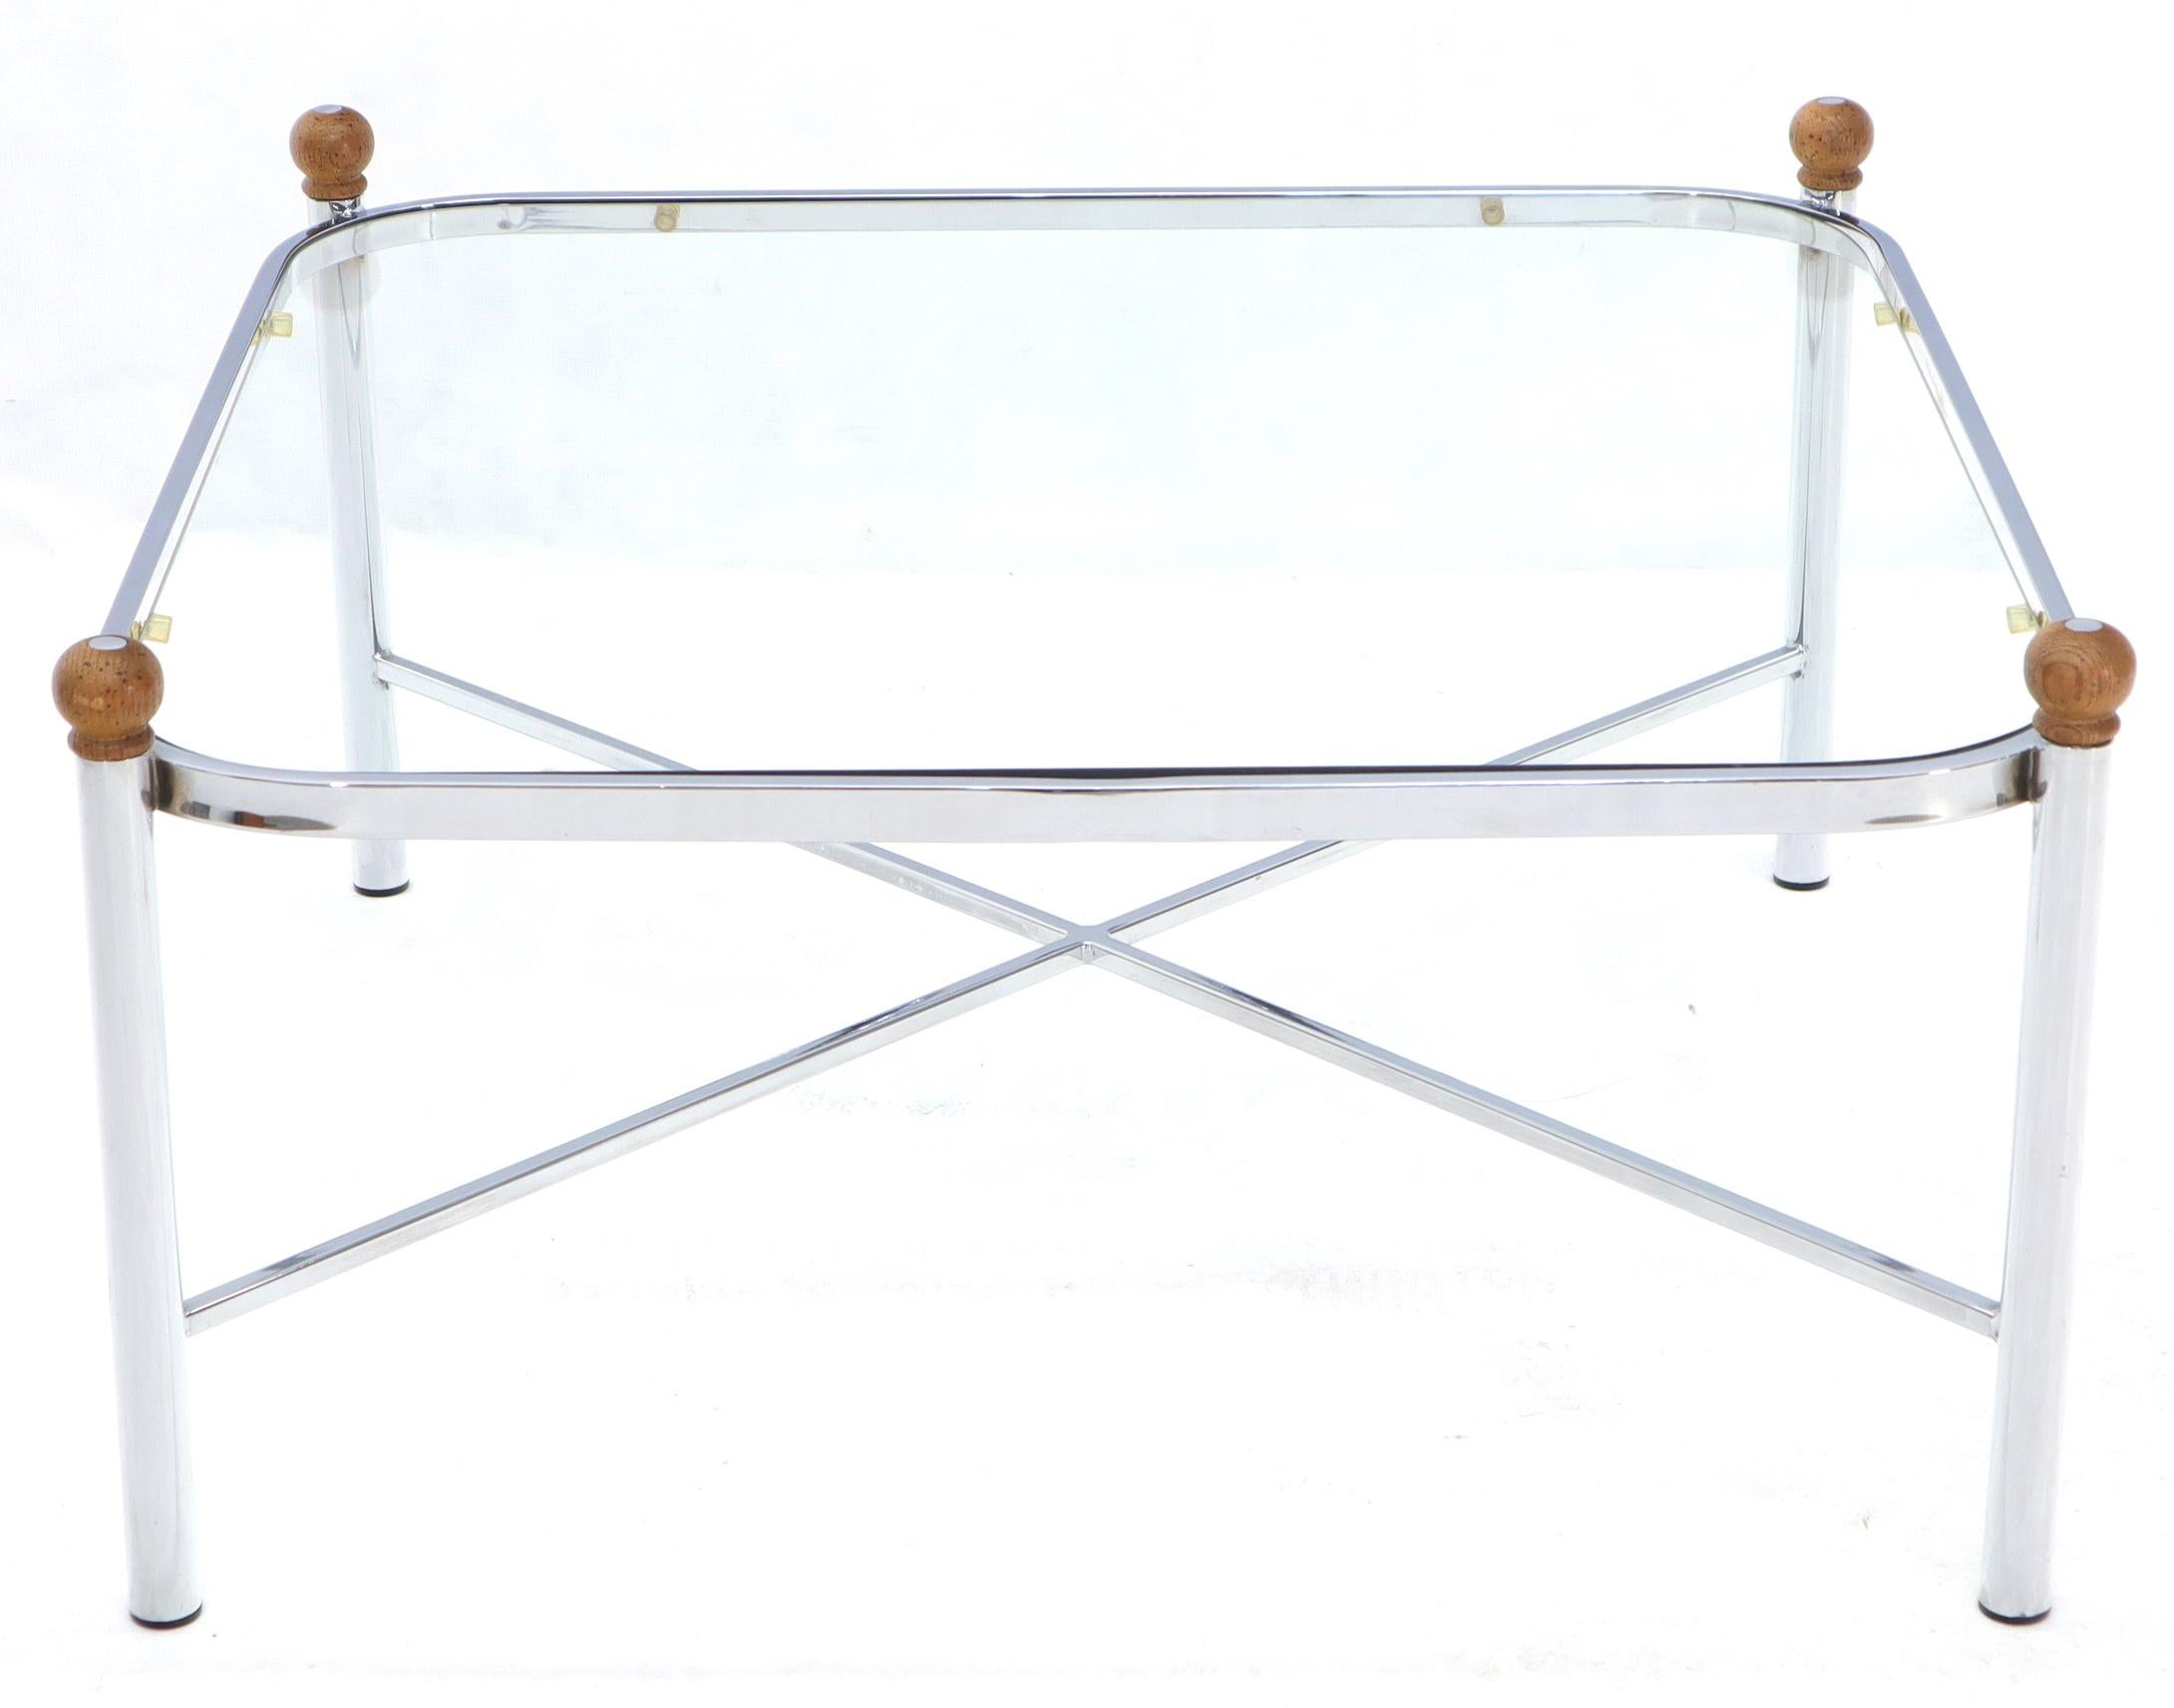 square coffee table rounded corners